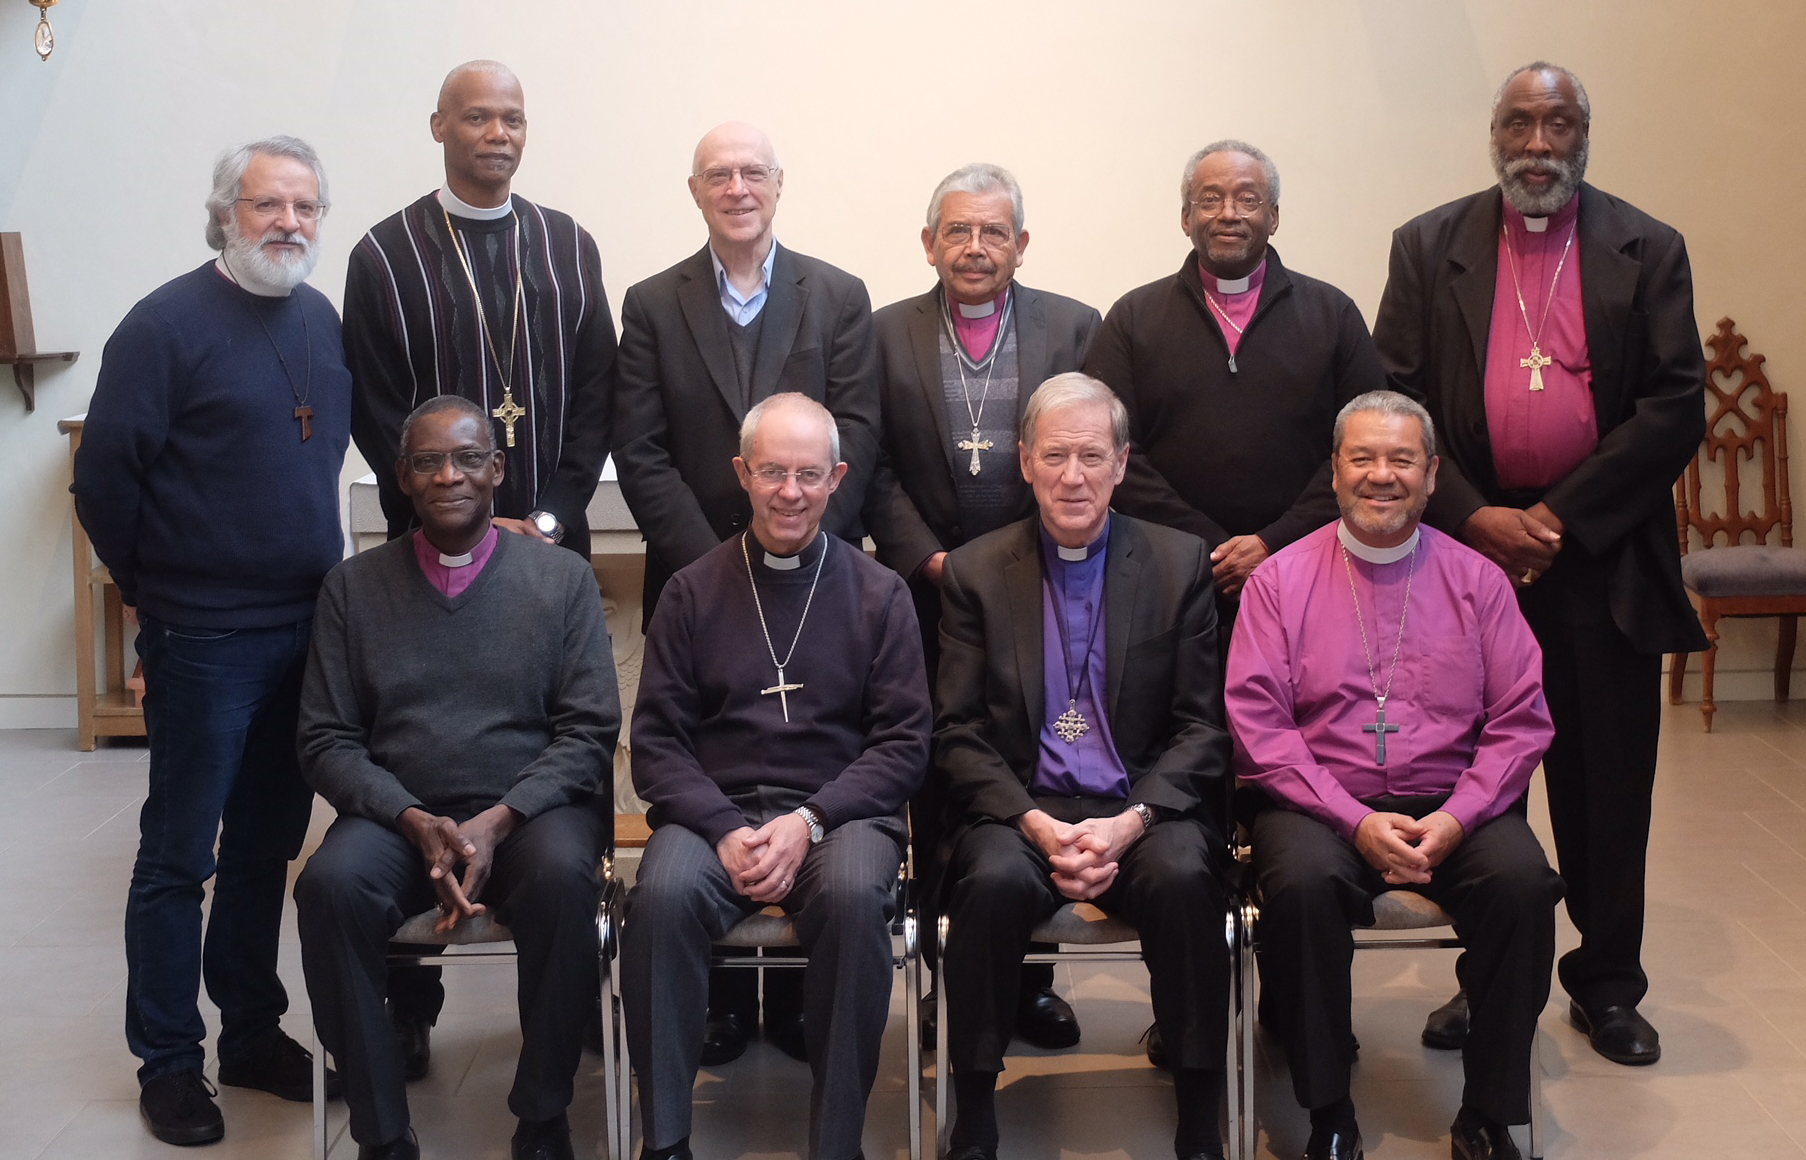 Anglican leaders from the Americas gather in Toronto for regional Primates’ Meeting.